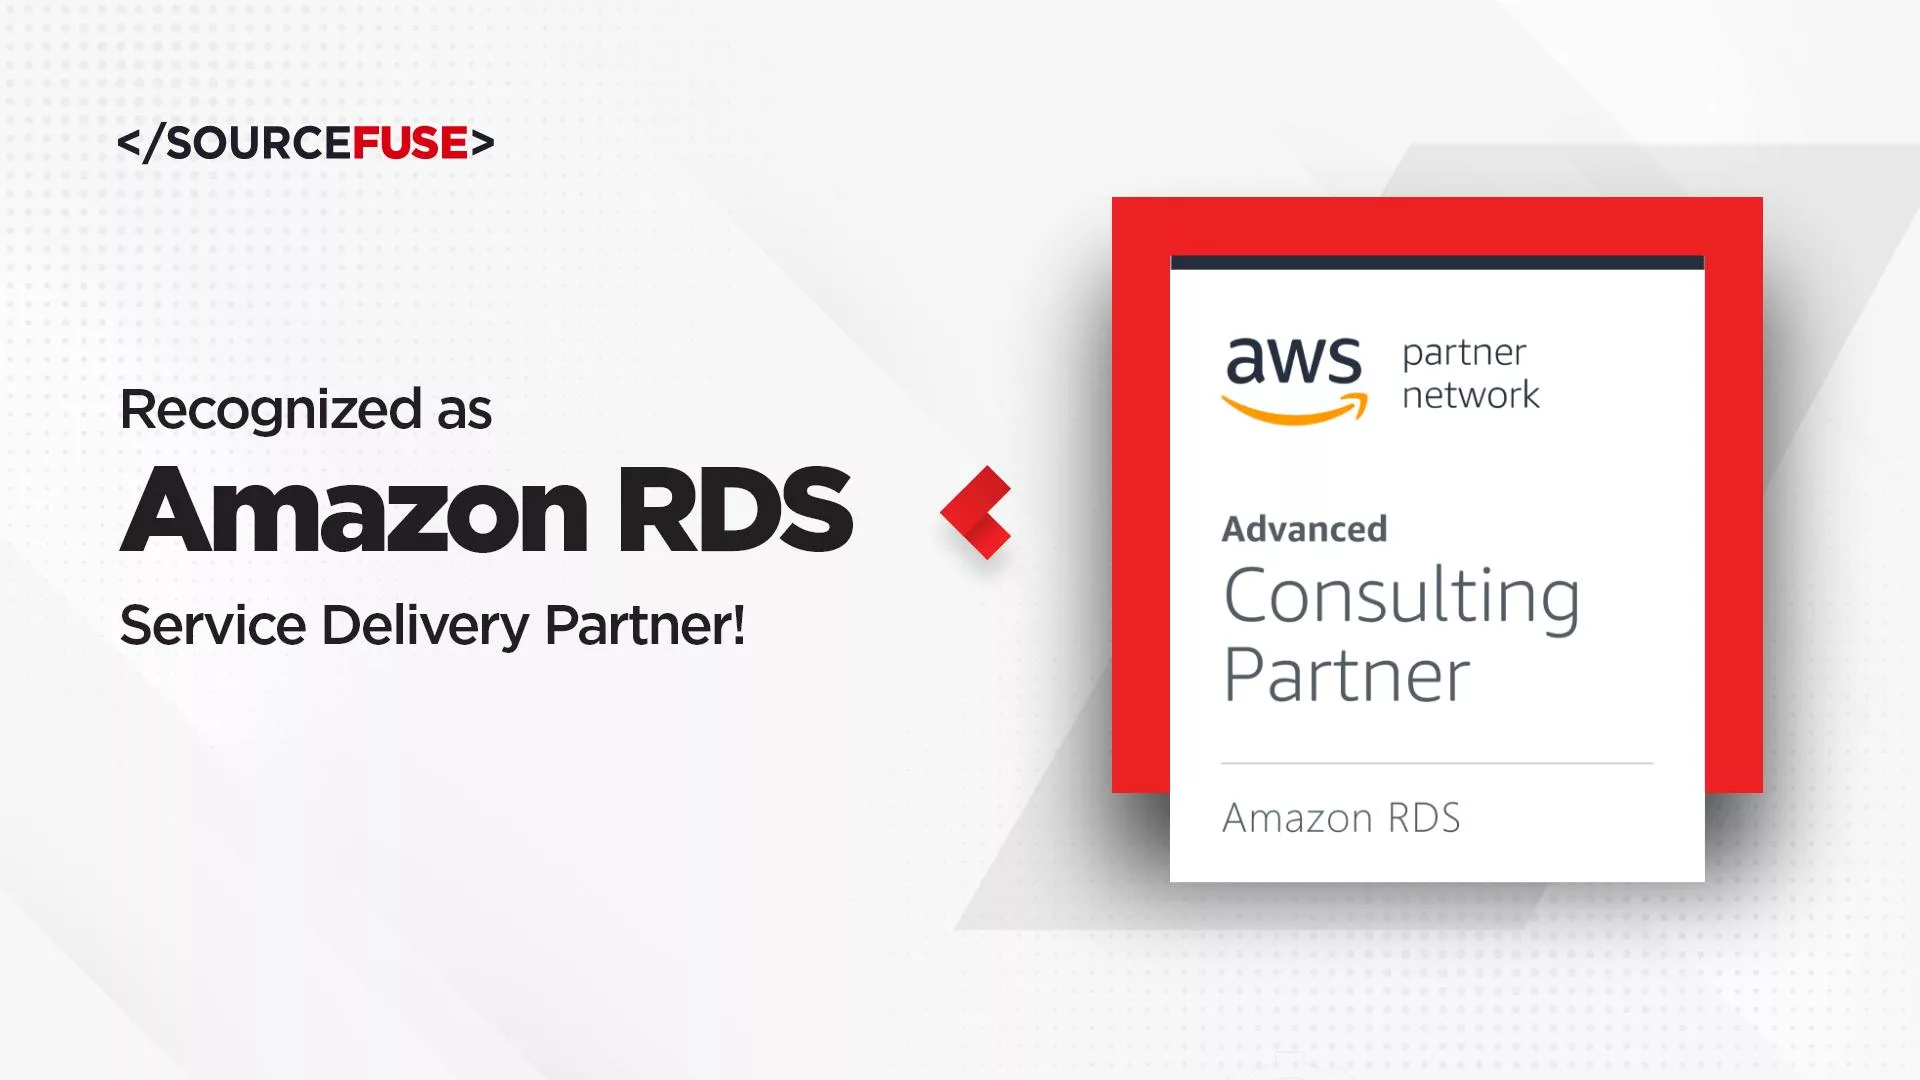 SourceFuse recognized as an Amazon RDS Service Delivery Partner